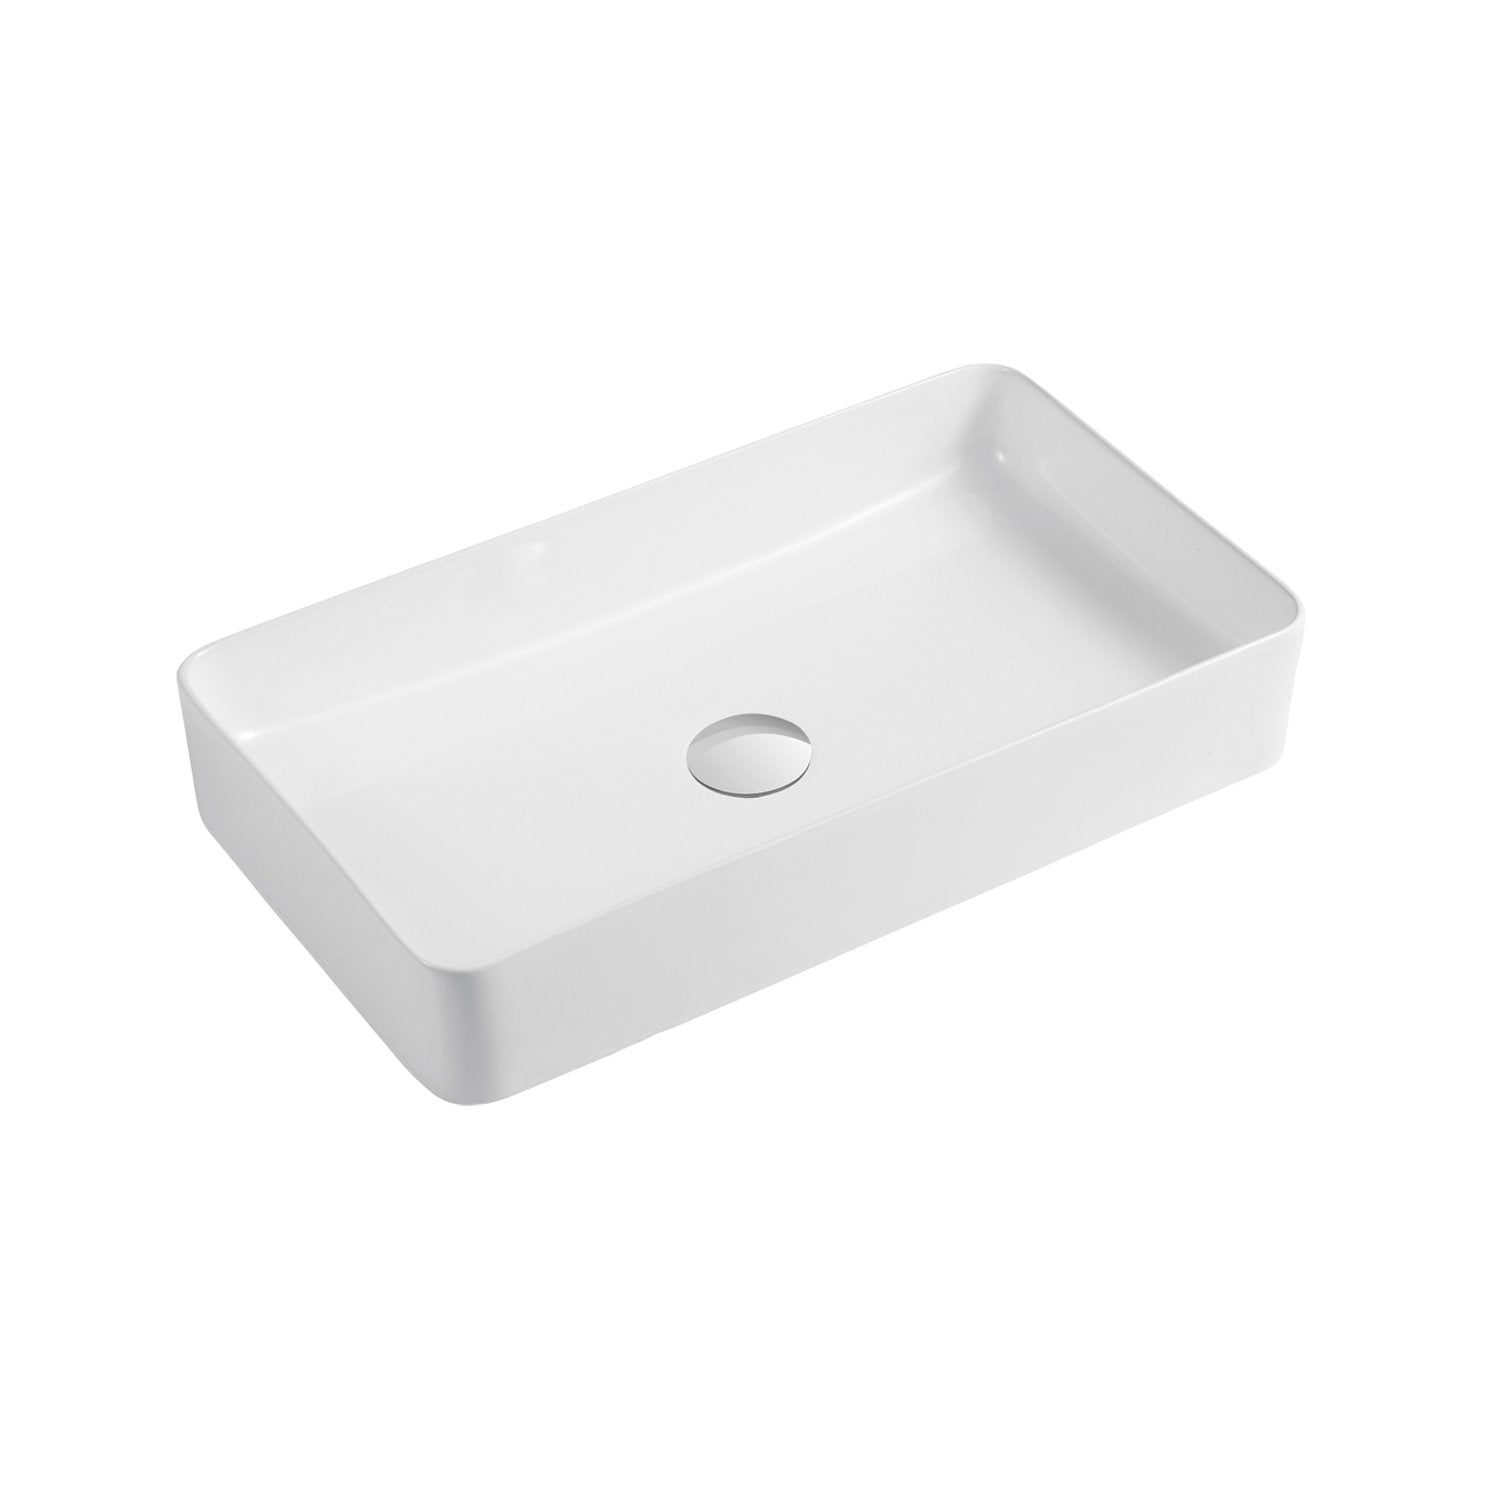 DAX Ceramic Rectangle Single Bowl Bathroom Vessel Sink, White Finish,  24 x 13-9/16 x 4-5/16 Inches (BSN-CL1320)